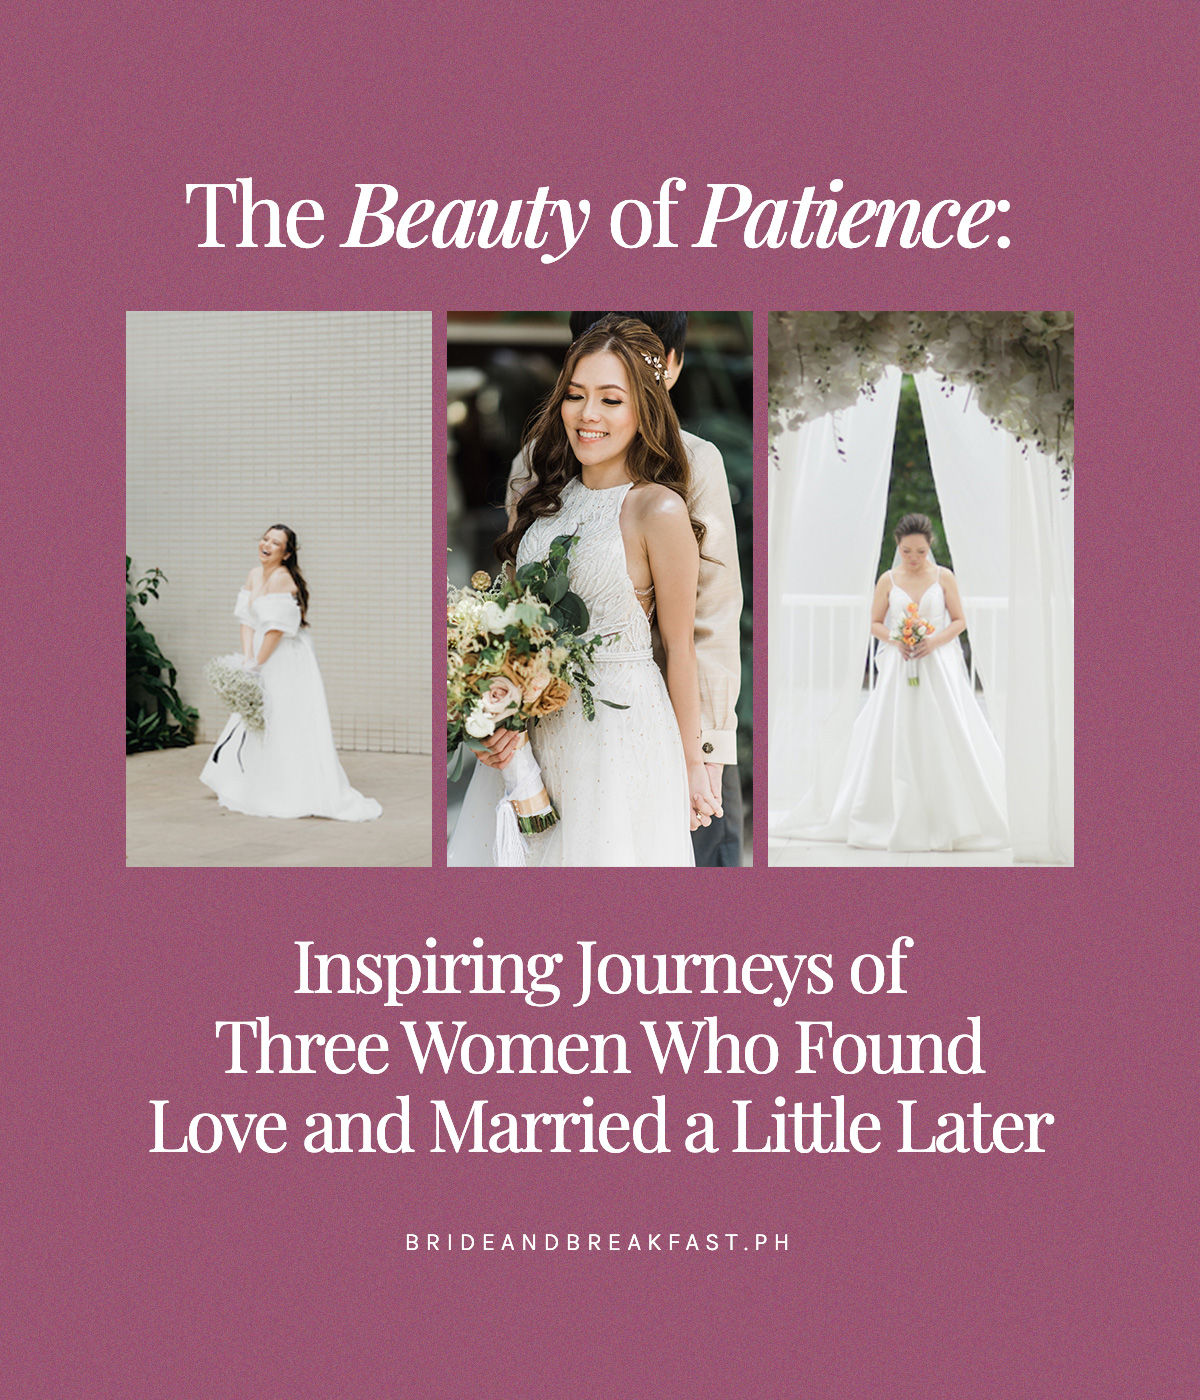 The Beauty of Patience: Inspiring Journeys of Three Women Who Found Love and Married a Little Later